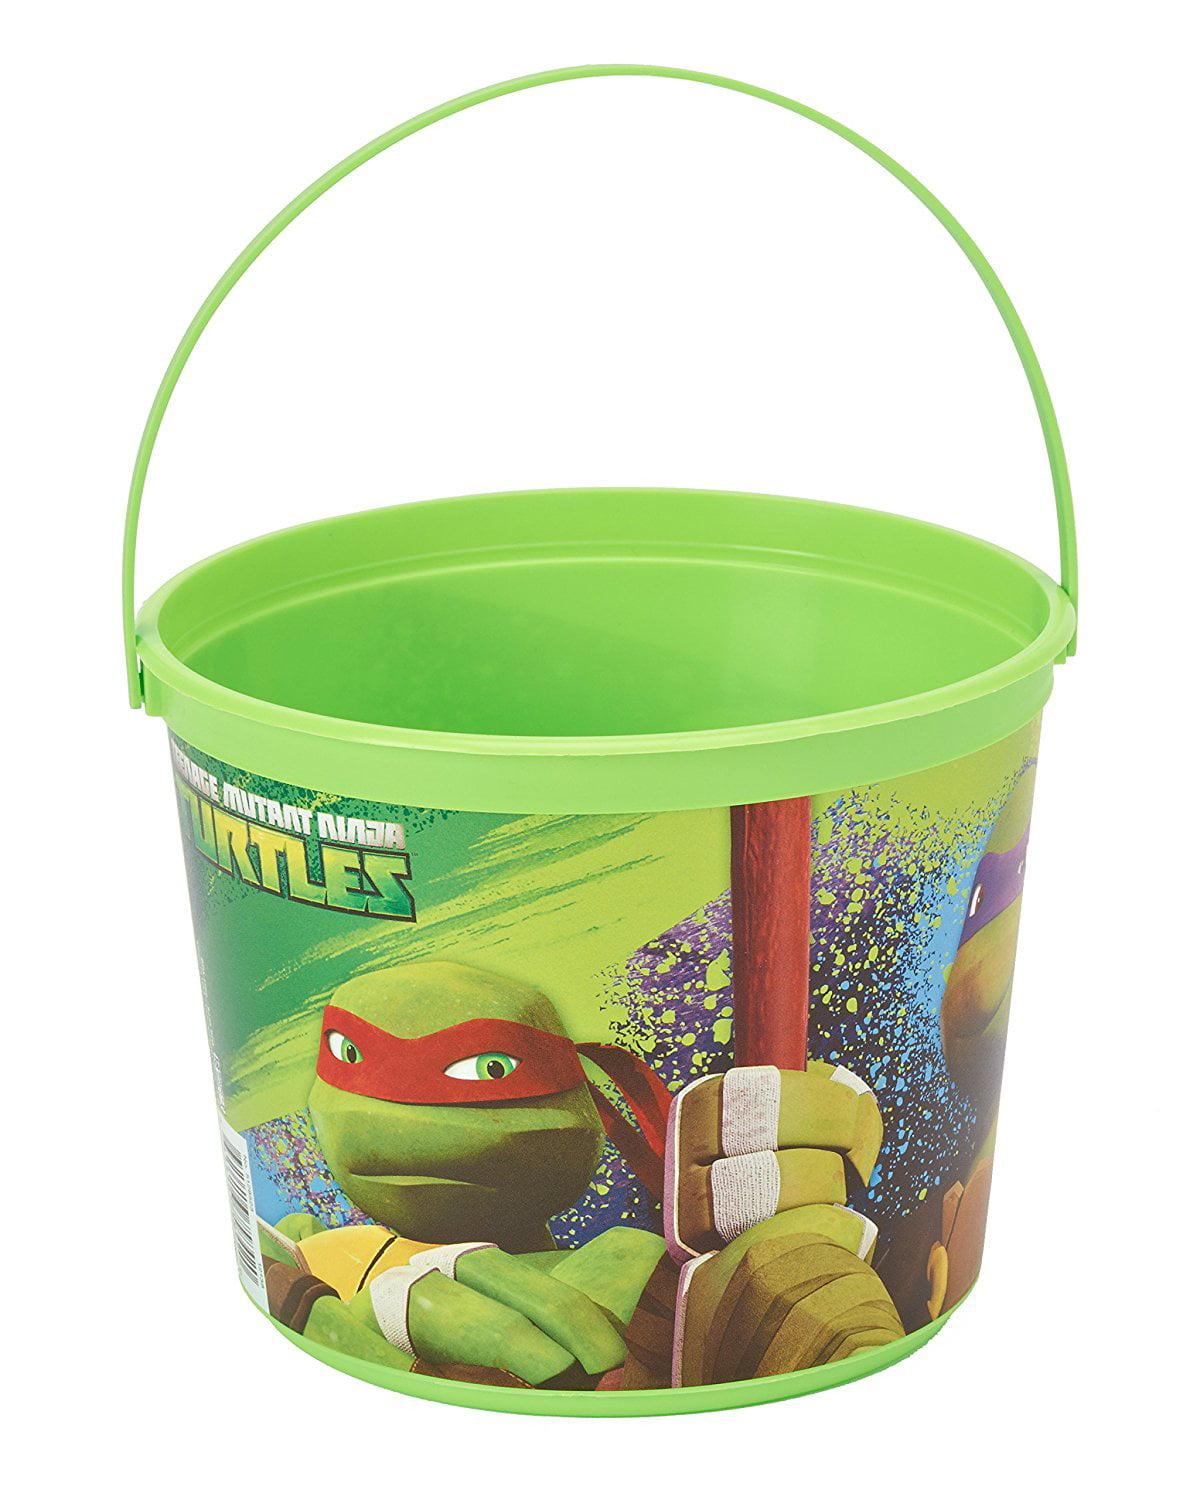 lot of kids cups and containers for school ninja turtles And